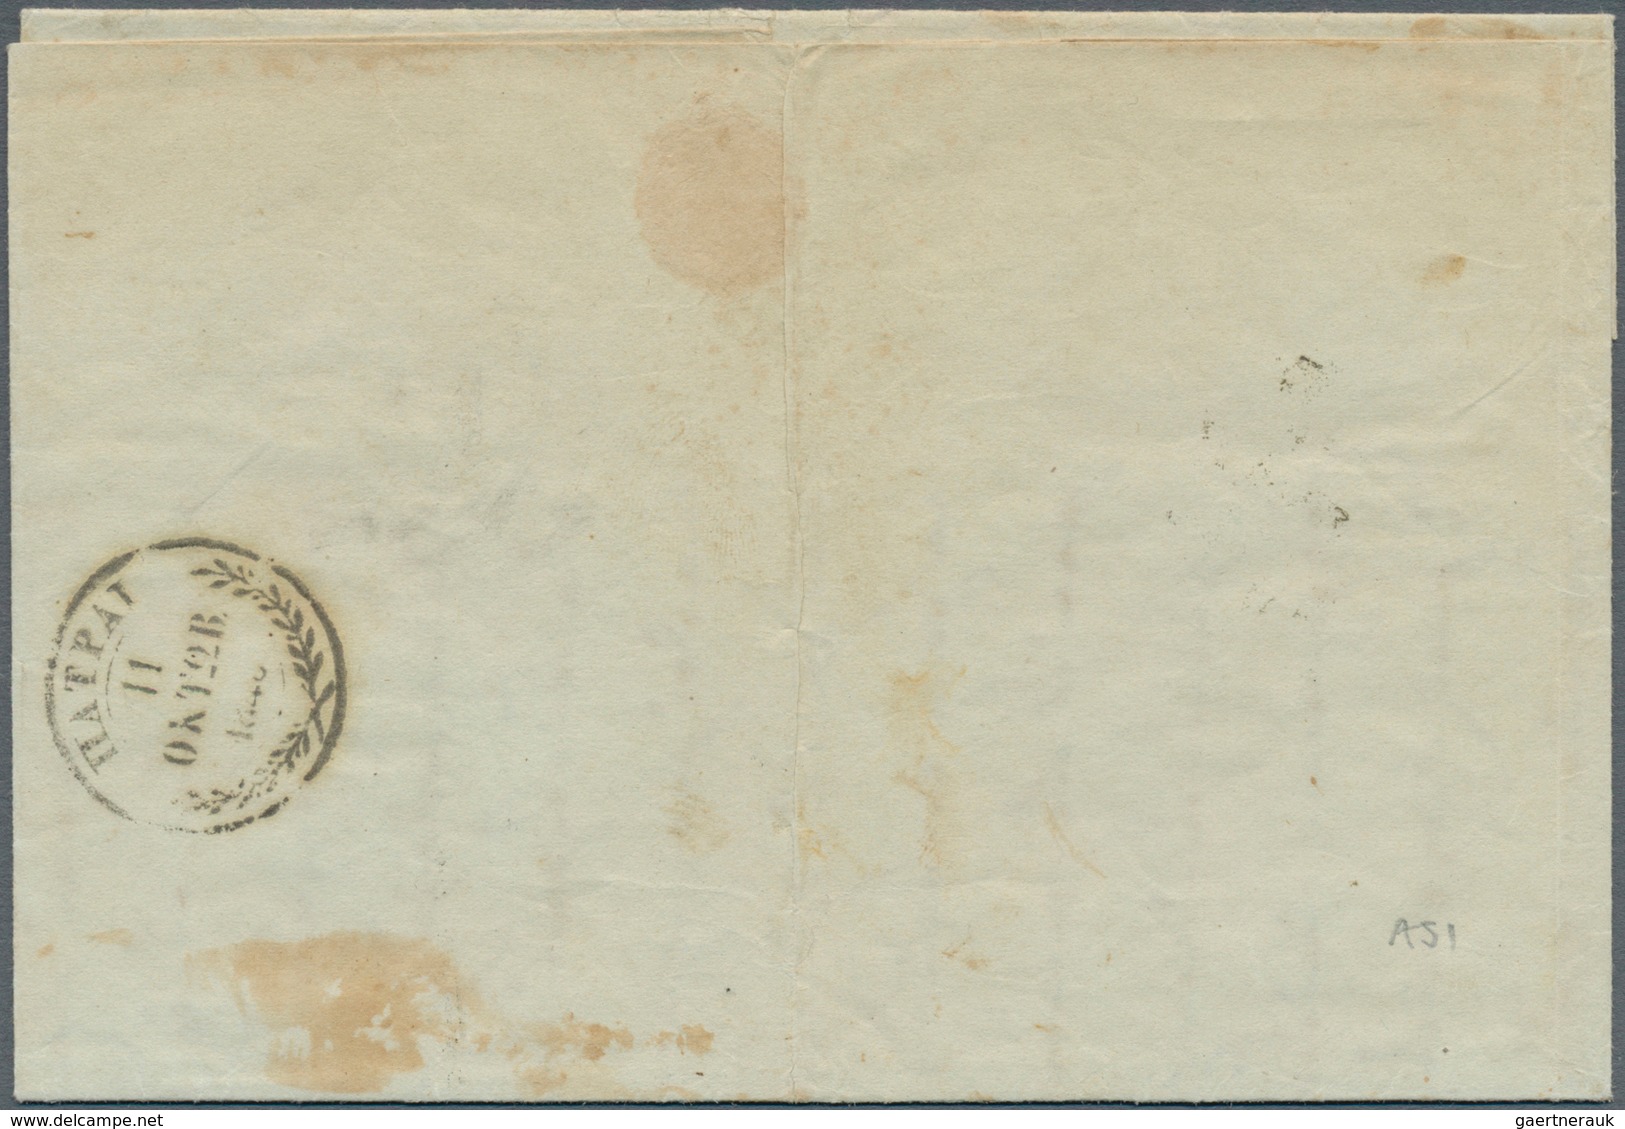 14280 Ionische Inseln - Vorphilatelie: 1845, Folded Letter With Black Crowned Double Circle PAID AT CORFU - Iles Ioniques